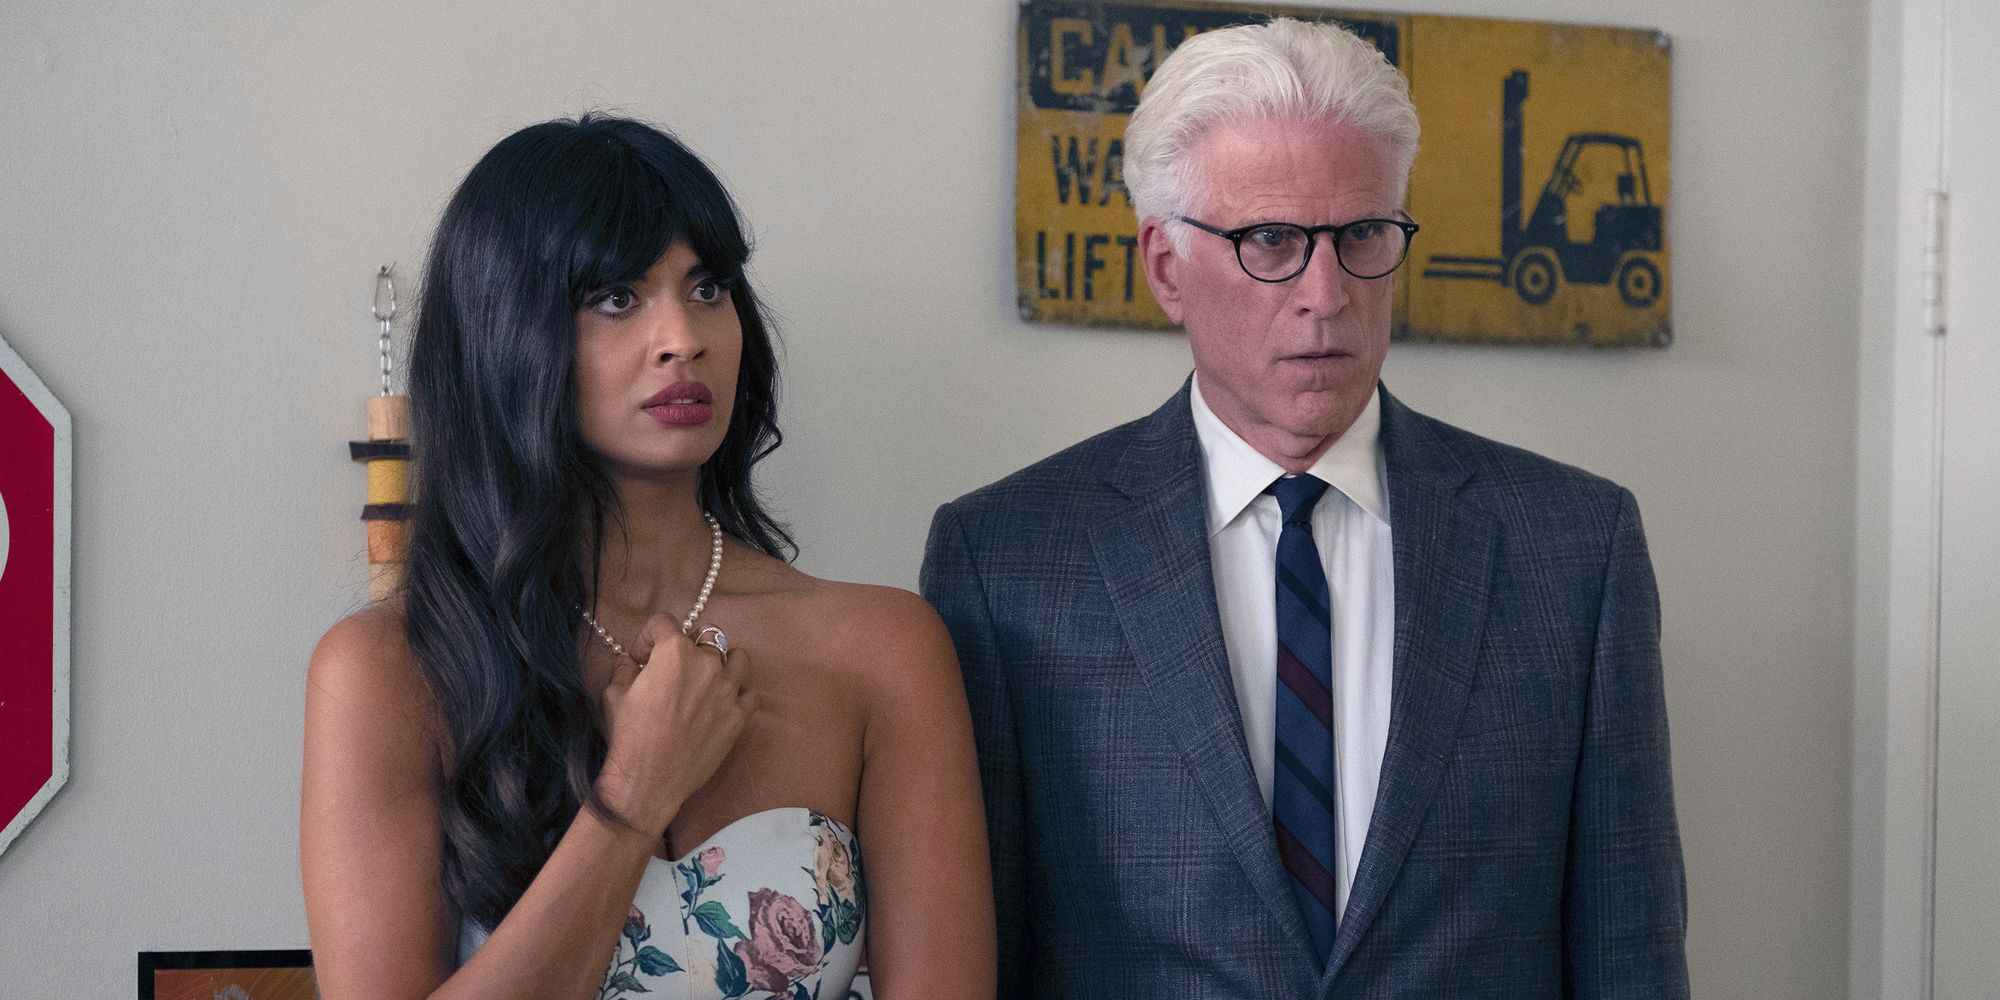 Jameela Jamil and Ted Danson in The Good Place